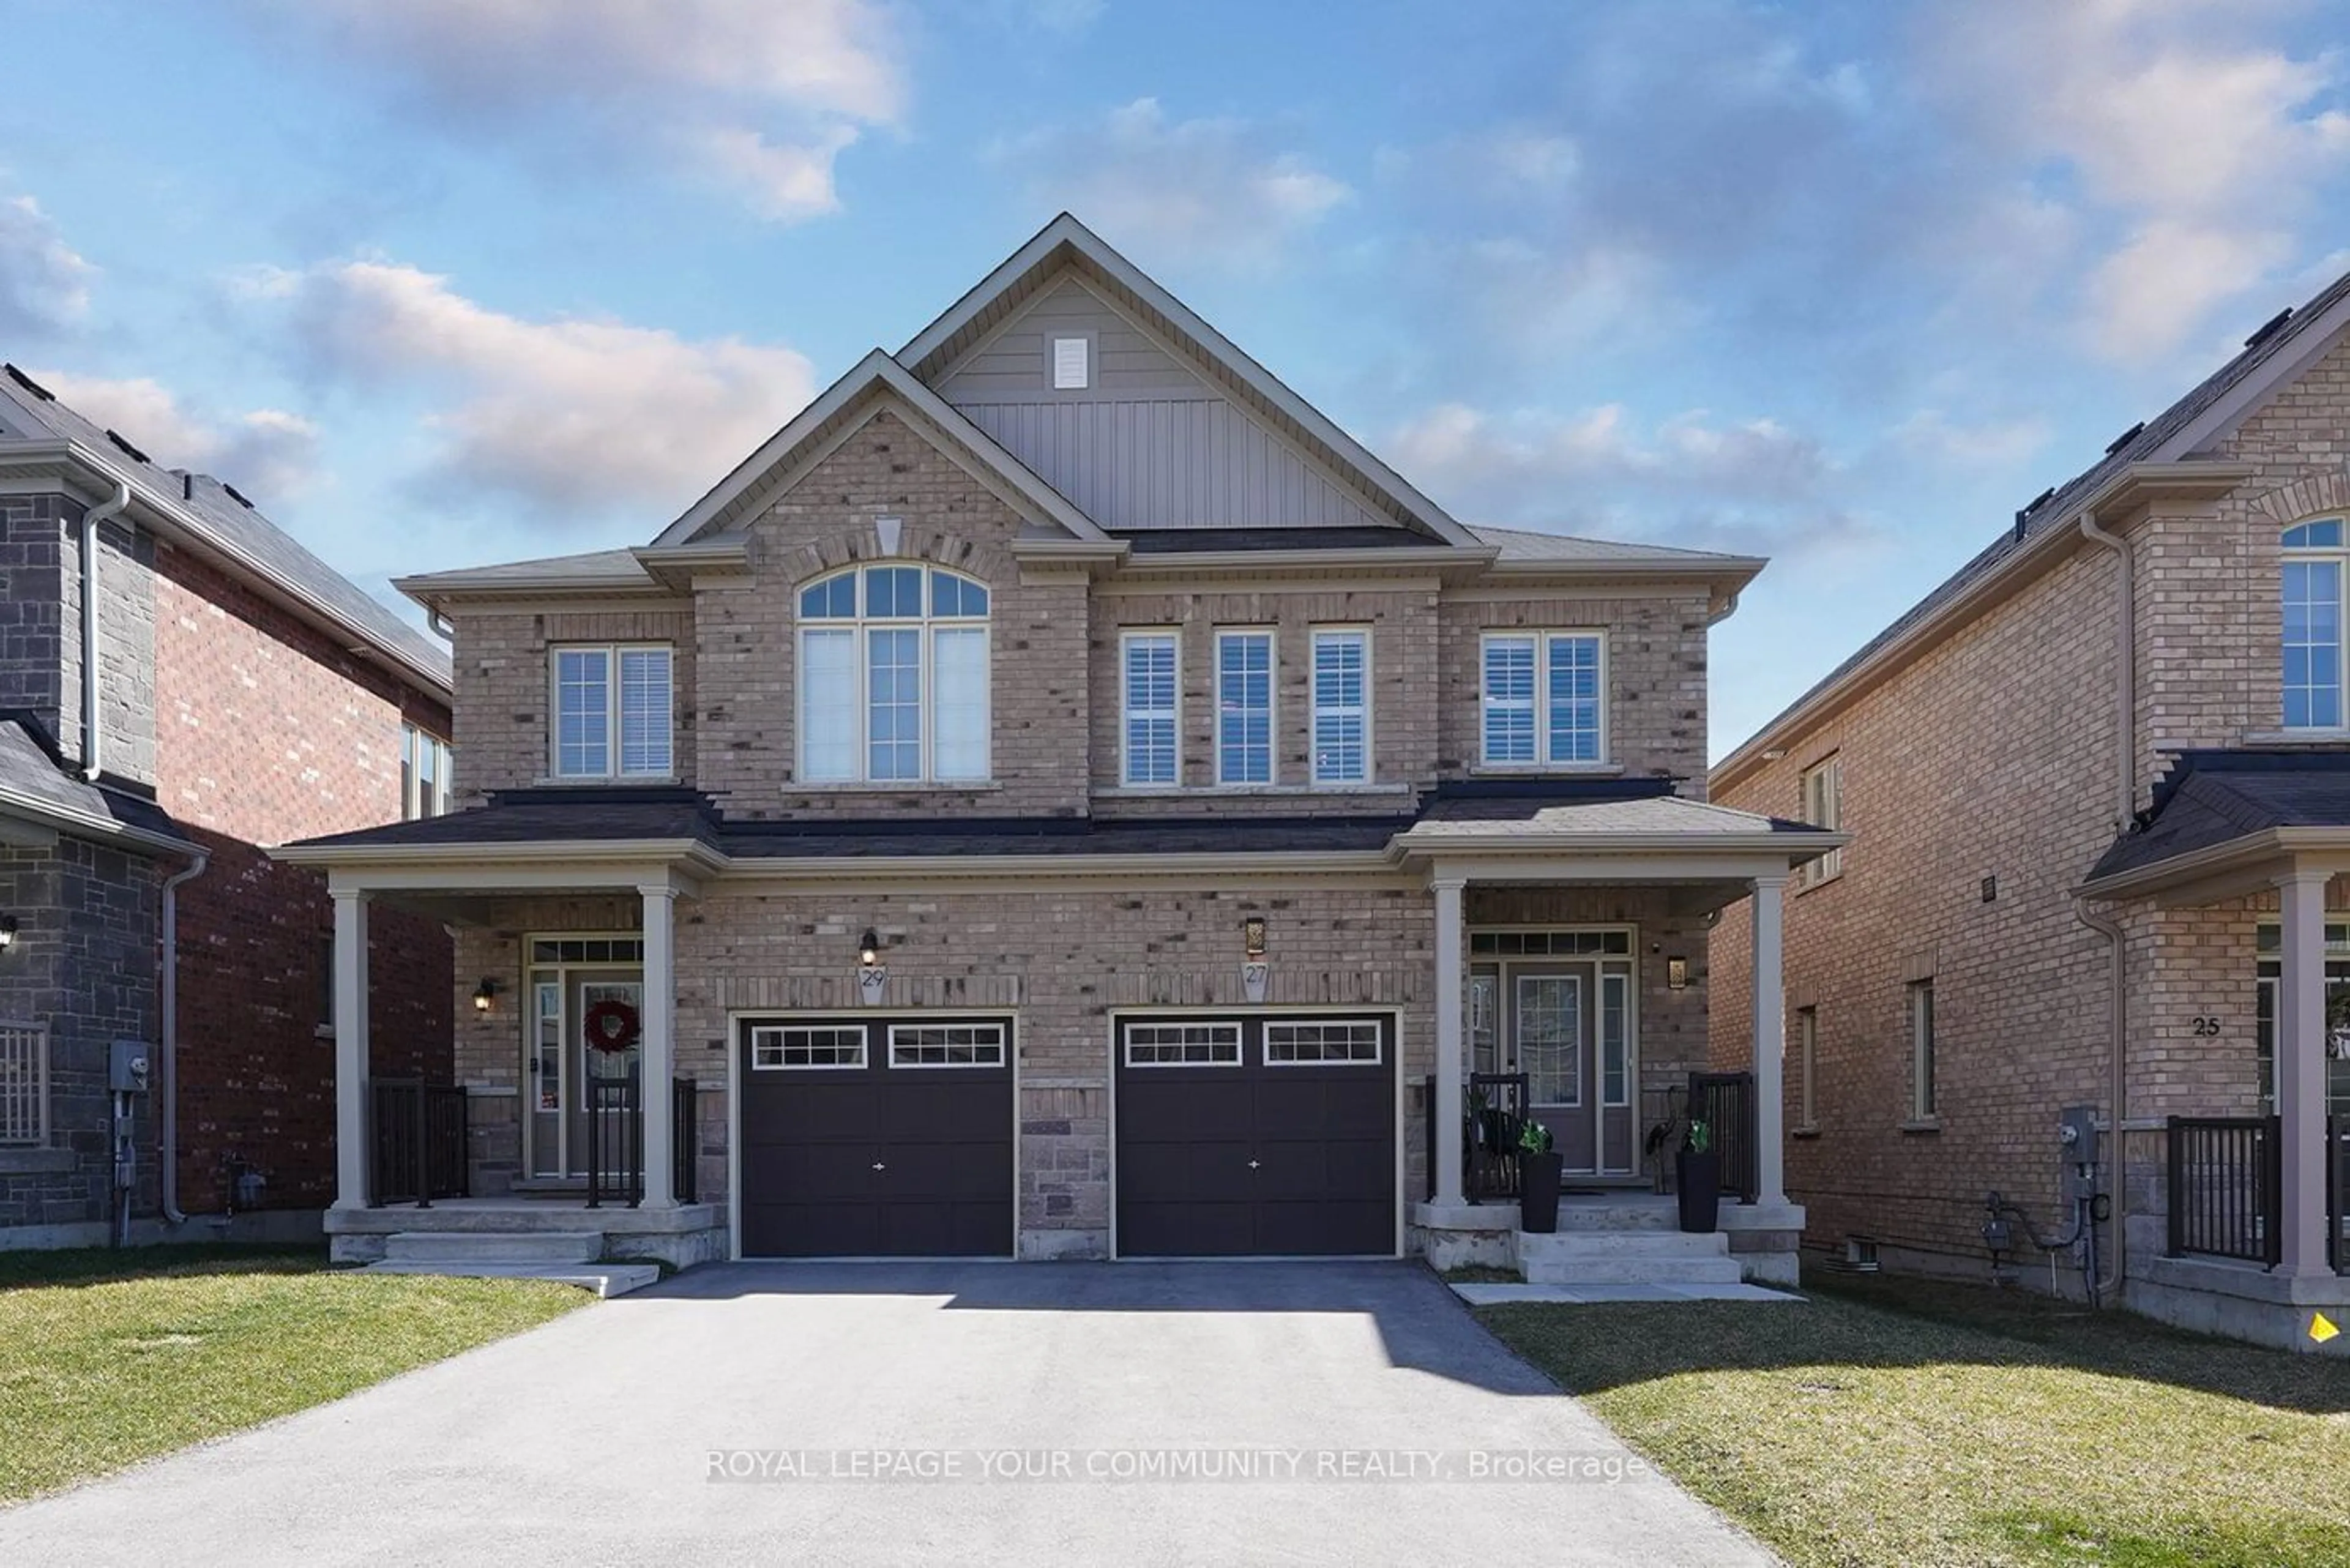 Home with brick exterior material for 27 Robb Thompson Rd, East Gwillimbury Ontario L0G 1M0